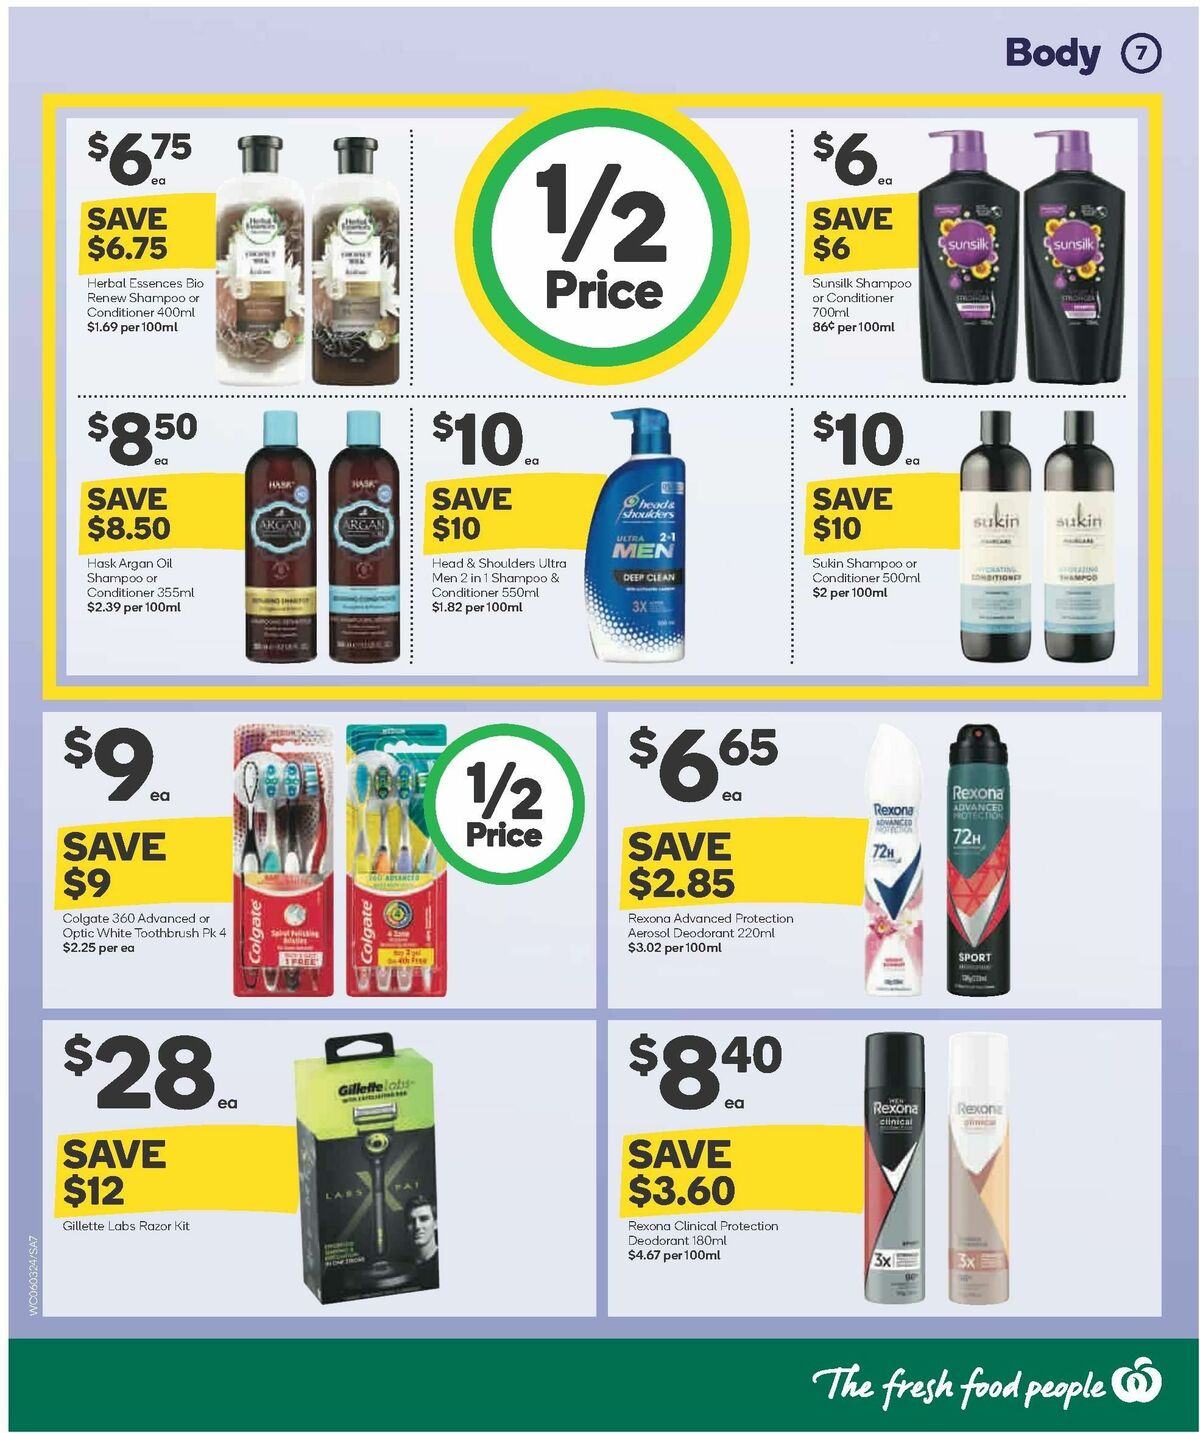 Woolworths Autumn Health & Beauty Catalogues from 5 March